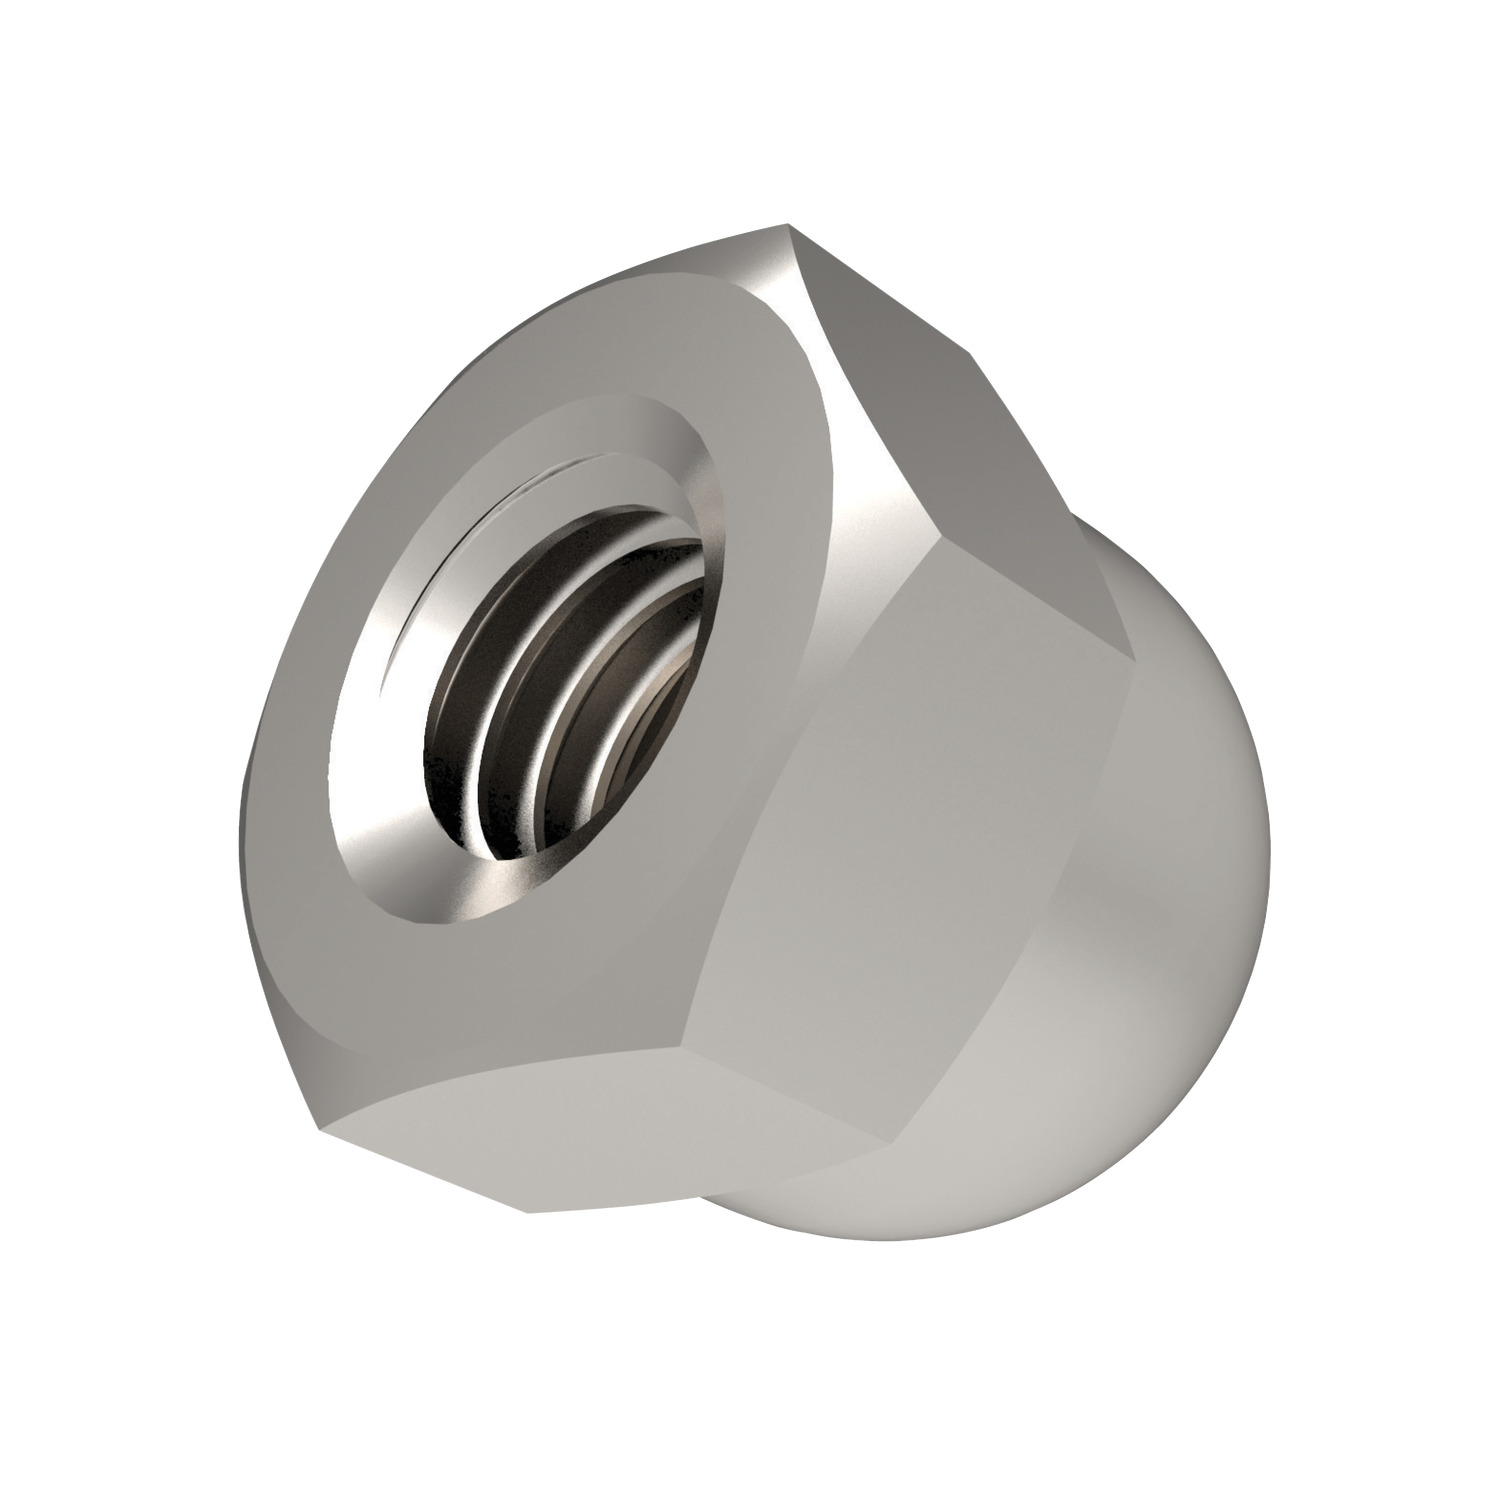 Hexagon Domed Nuts A2 stainless steel hexagon domed nuts. Sizes range from M3 to M30. Manufactured to DIN 1587.